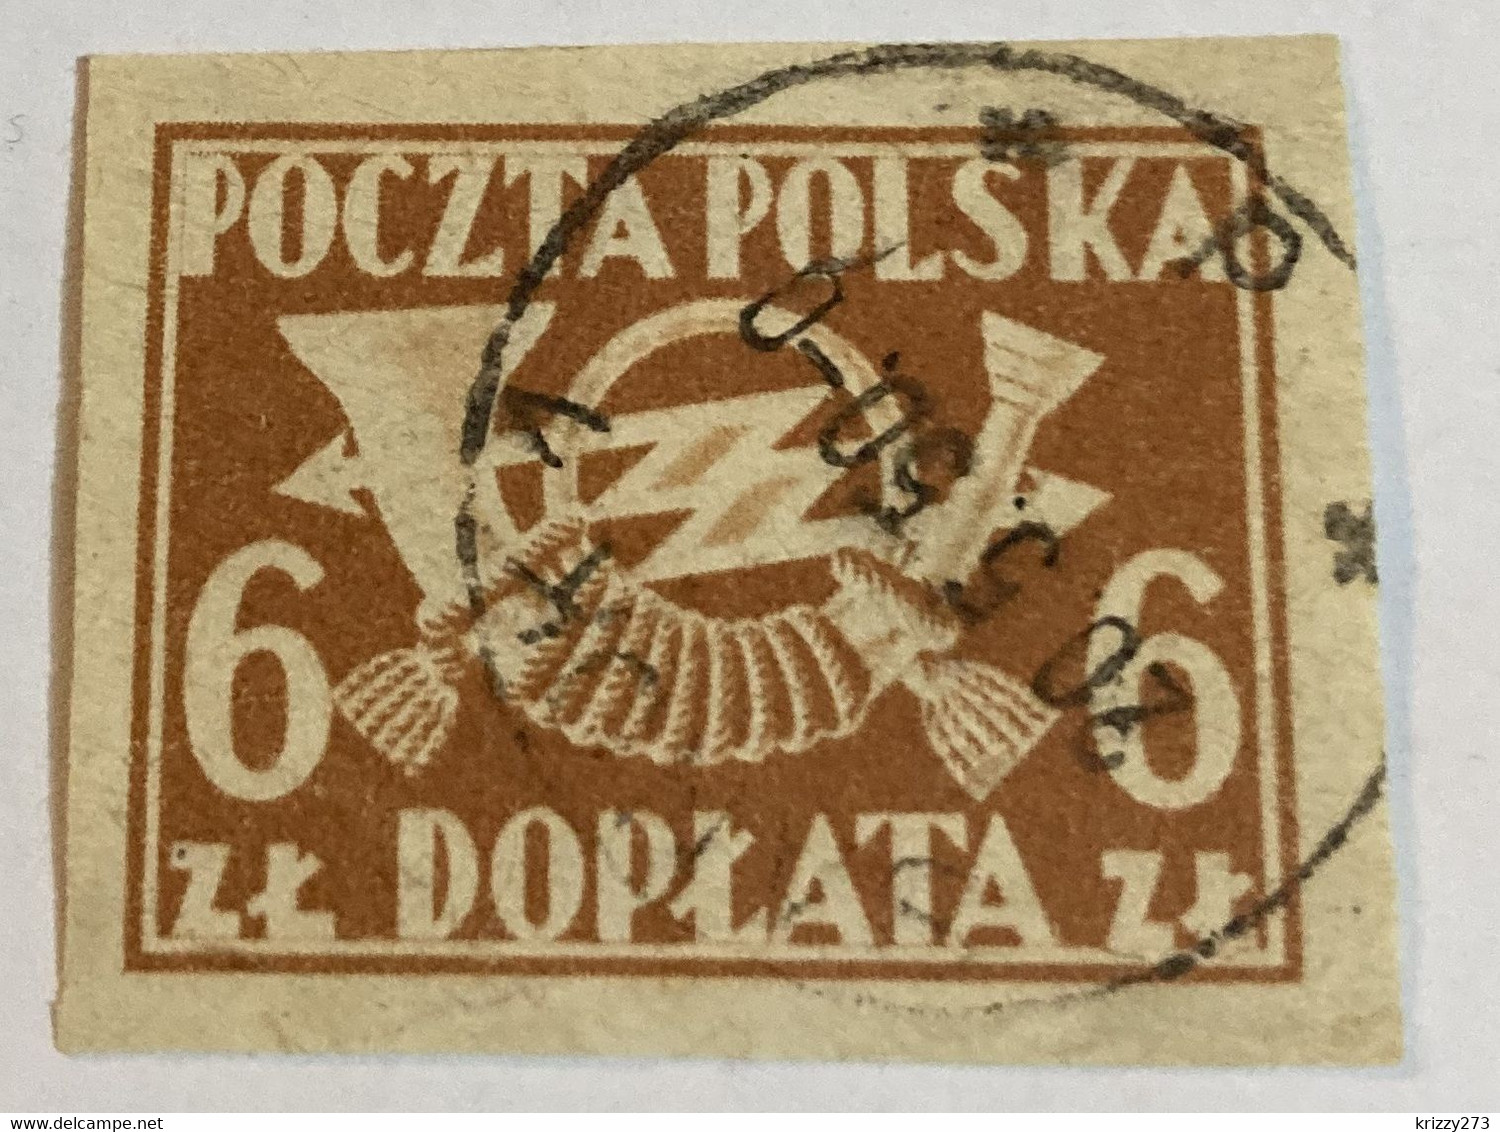 Poland 1946 Post Horn 6zl - Used - Postage Due